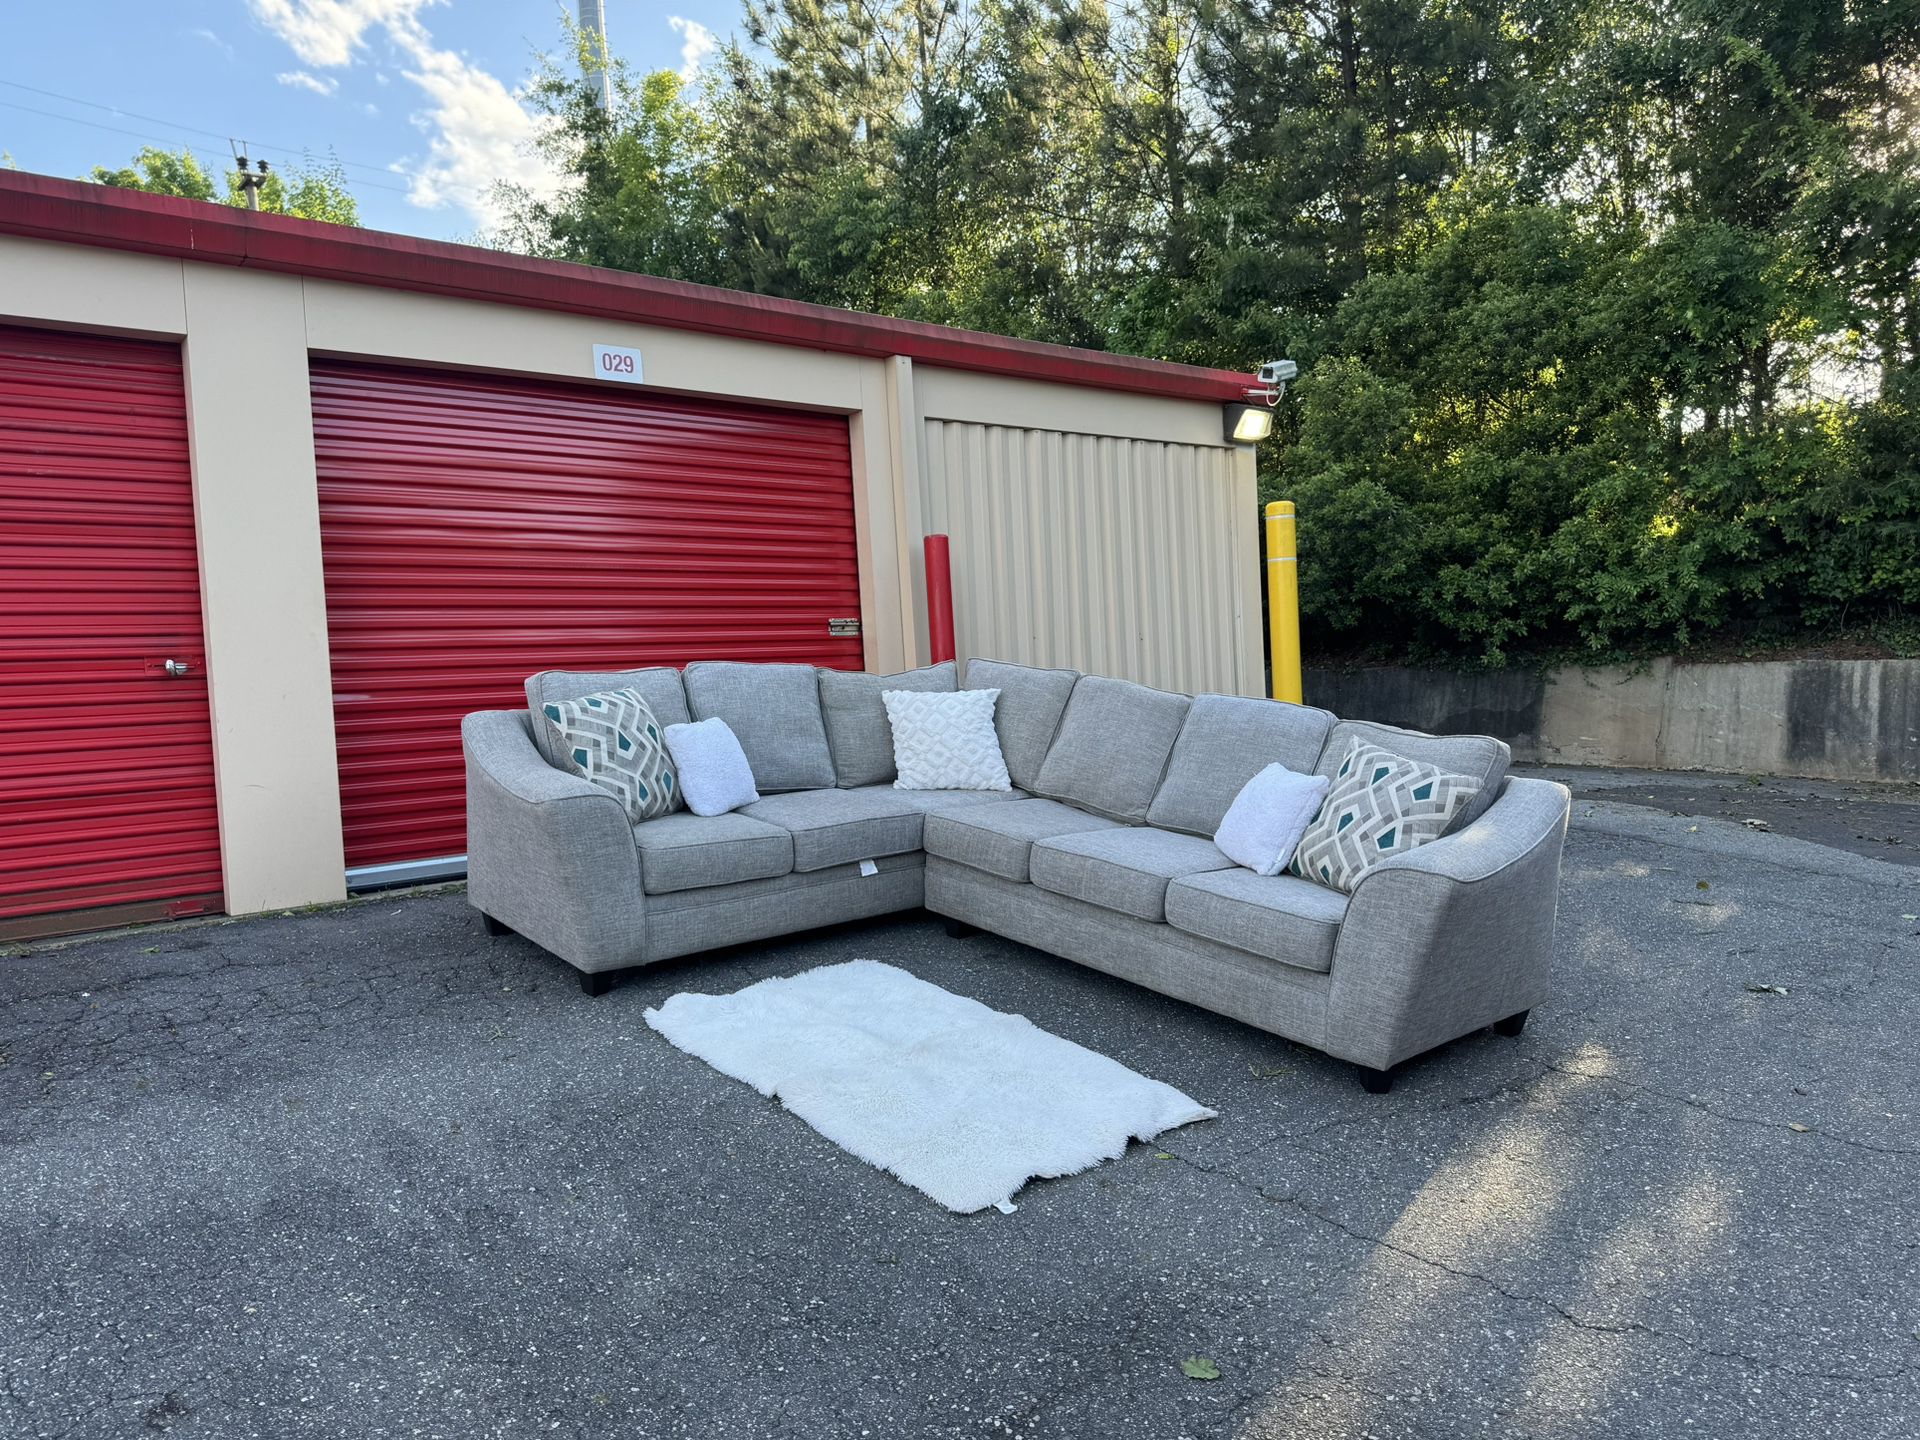 (Delivery) Large Grey Sectional Couch/Sofa 